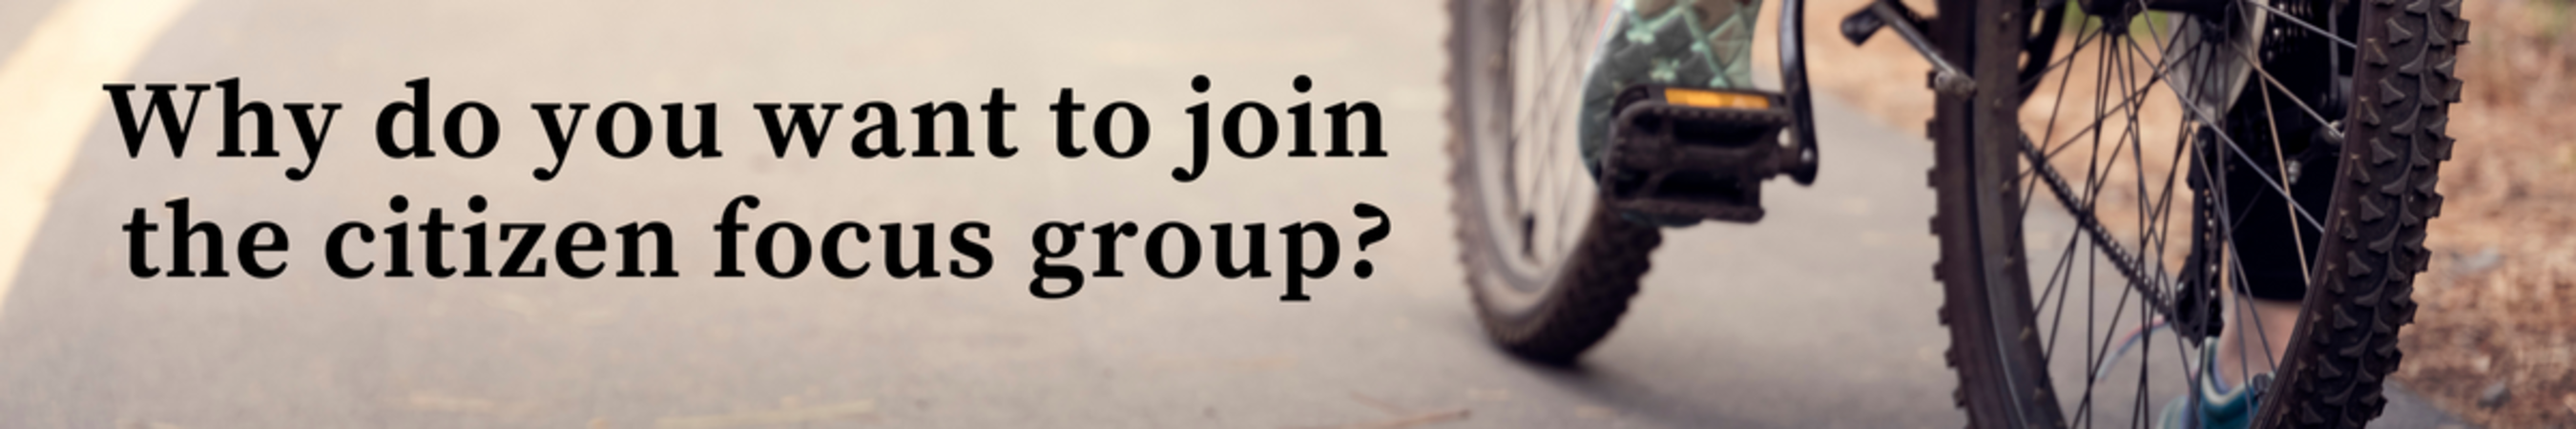 Why7 do you want to join the citizen focus group?